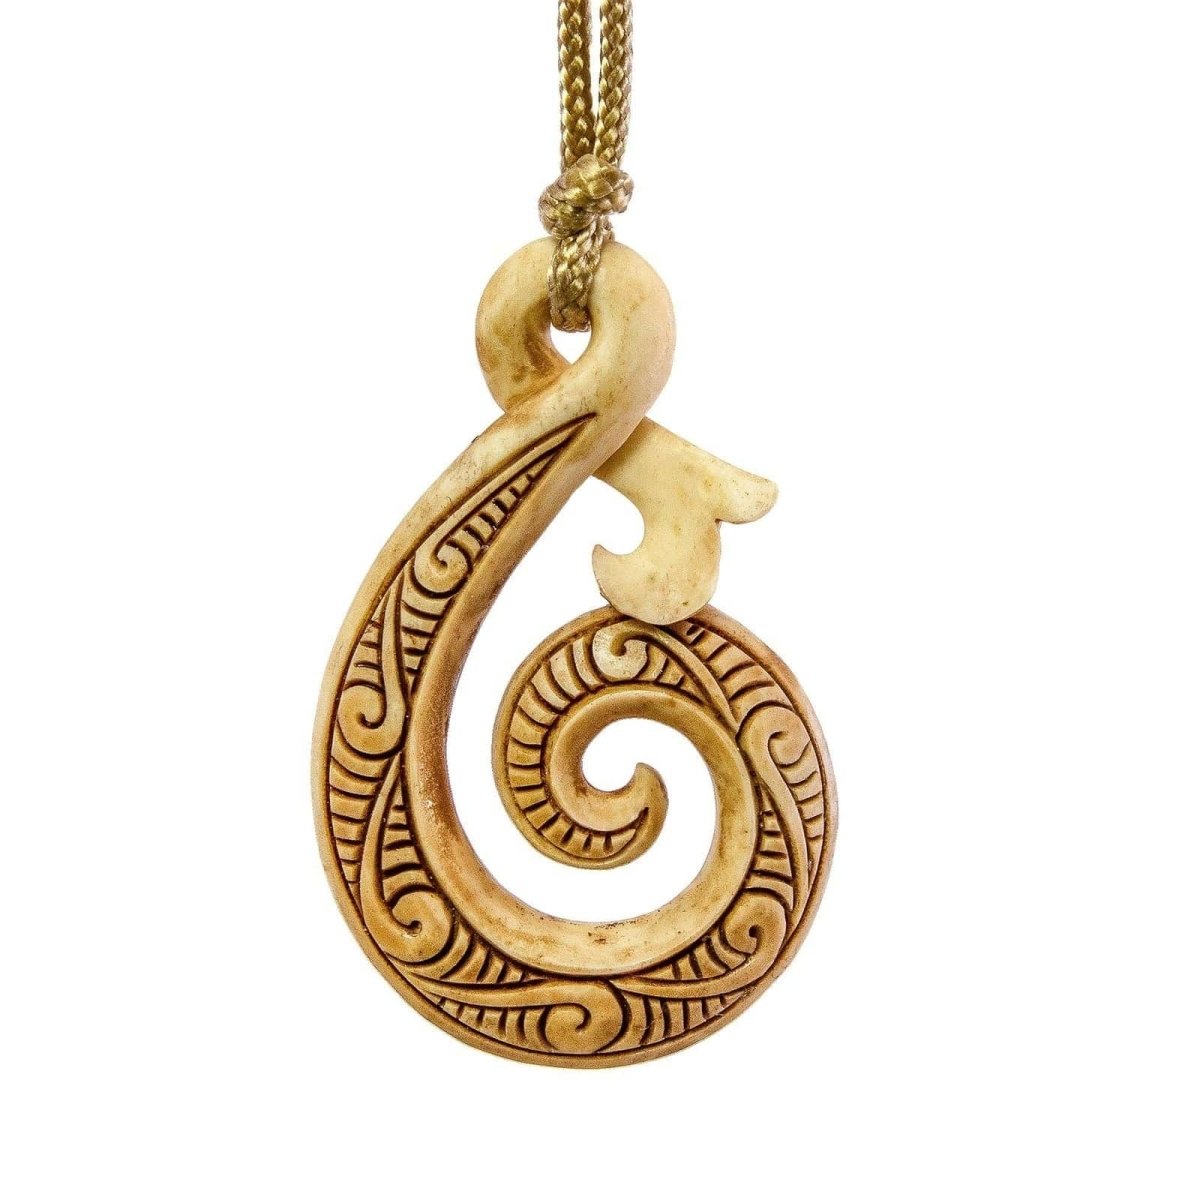 New Zealand Maori Inspired Carved Antiqued Bone infinity koru Necklace - Earthbound Pacific